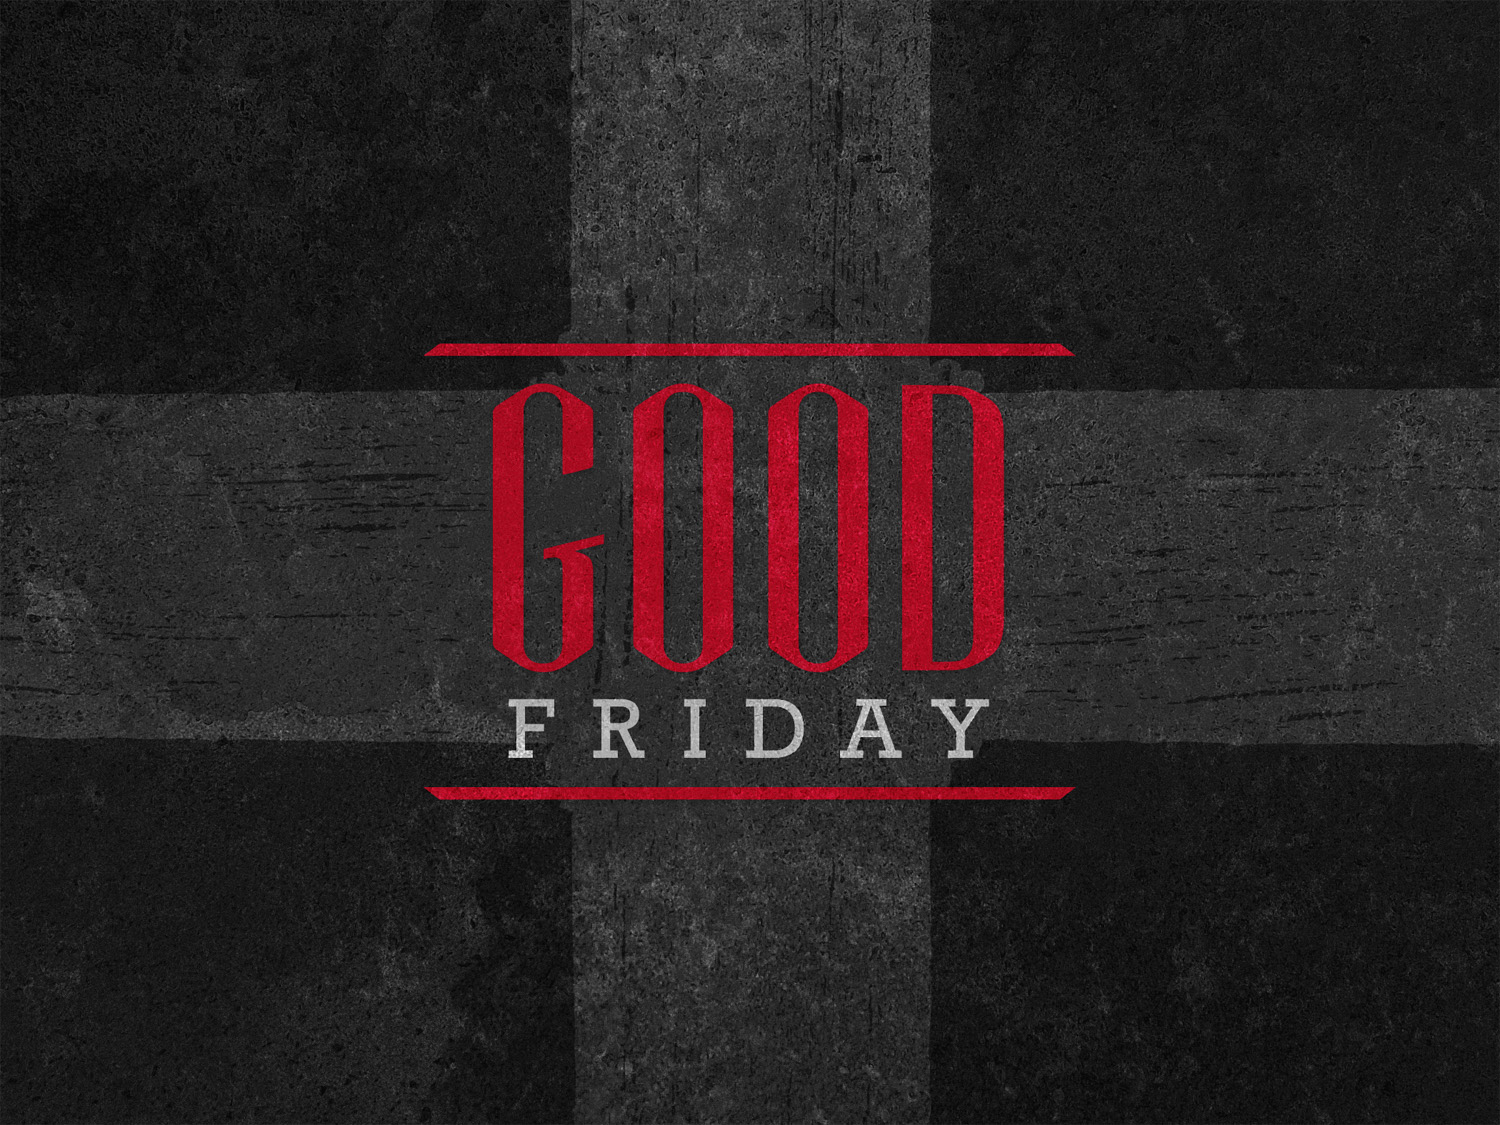 What Good Friday tells me about myself